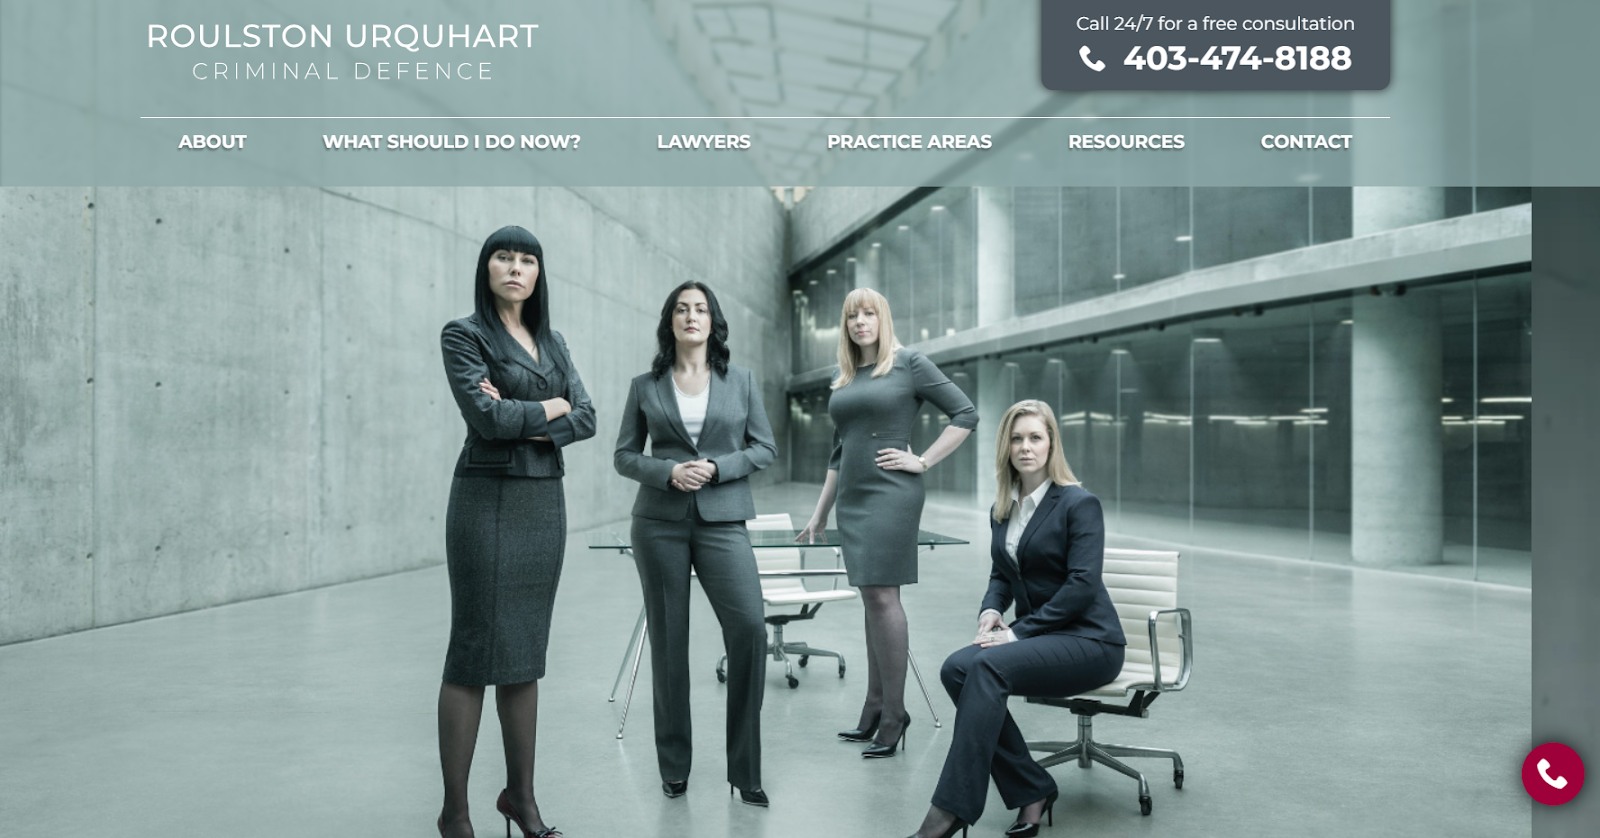 A criminal lawyer website in Calgary